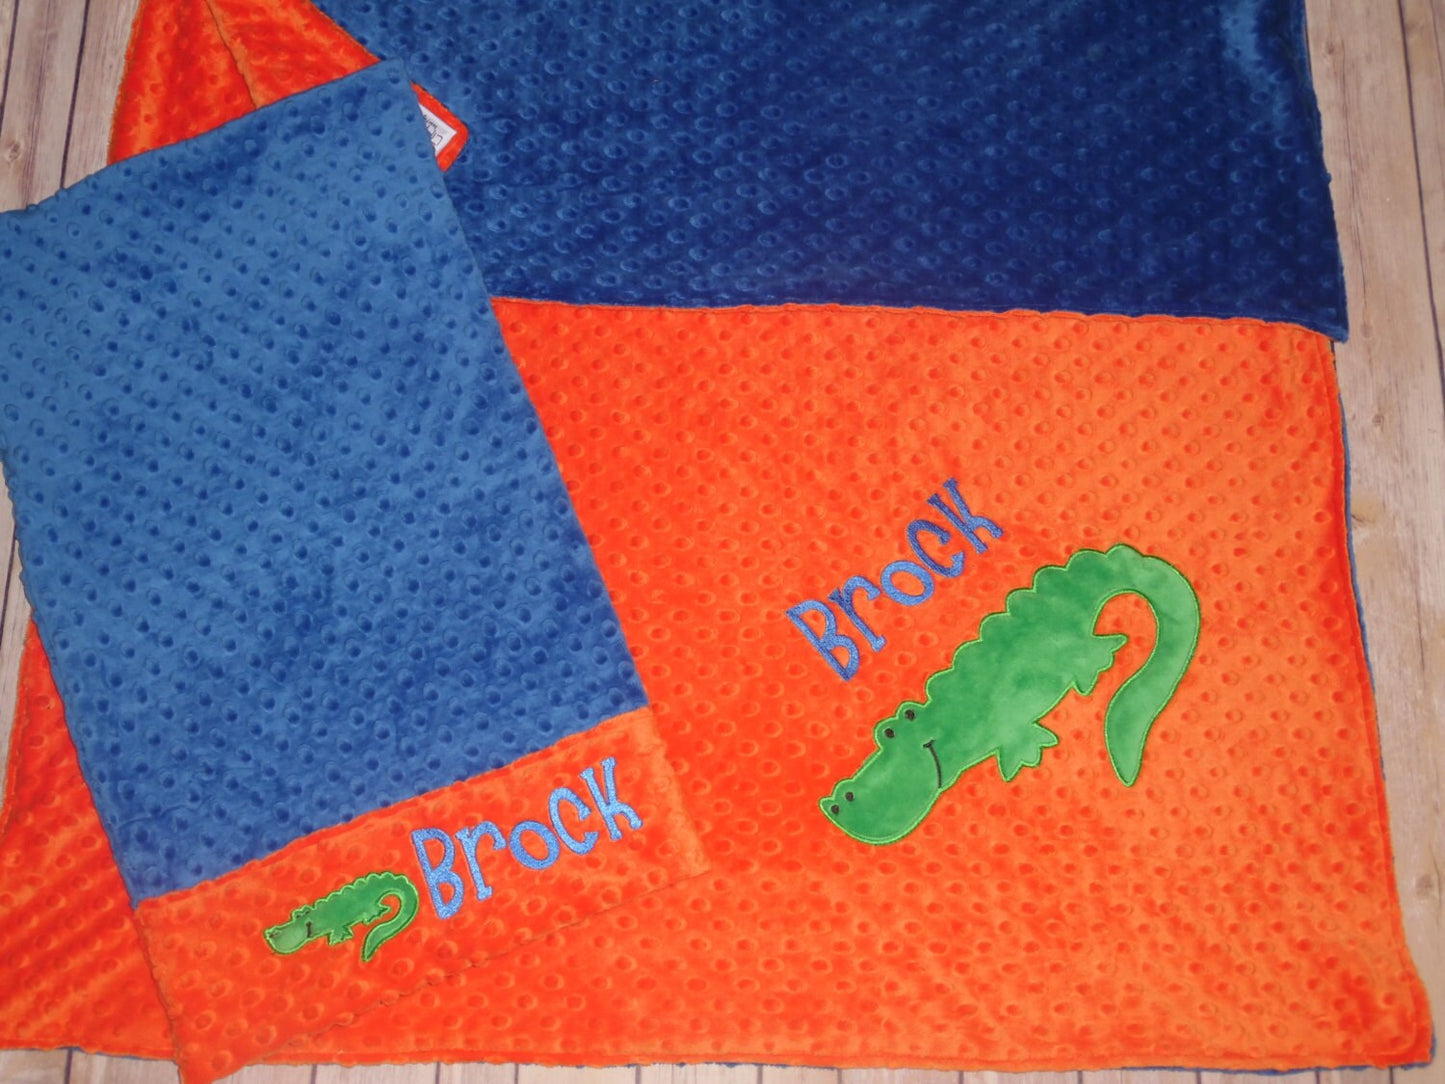 Alligator Nap Set - Personalized Minky Blanket and Pillowcase with embroidered Alligator - Travel or Standard Size